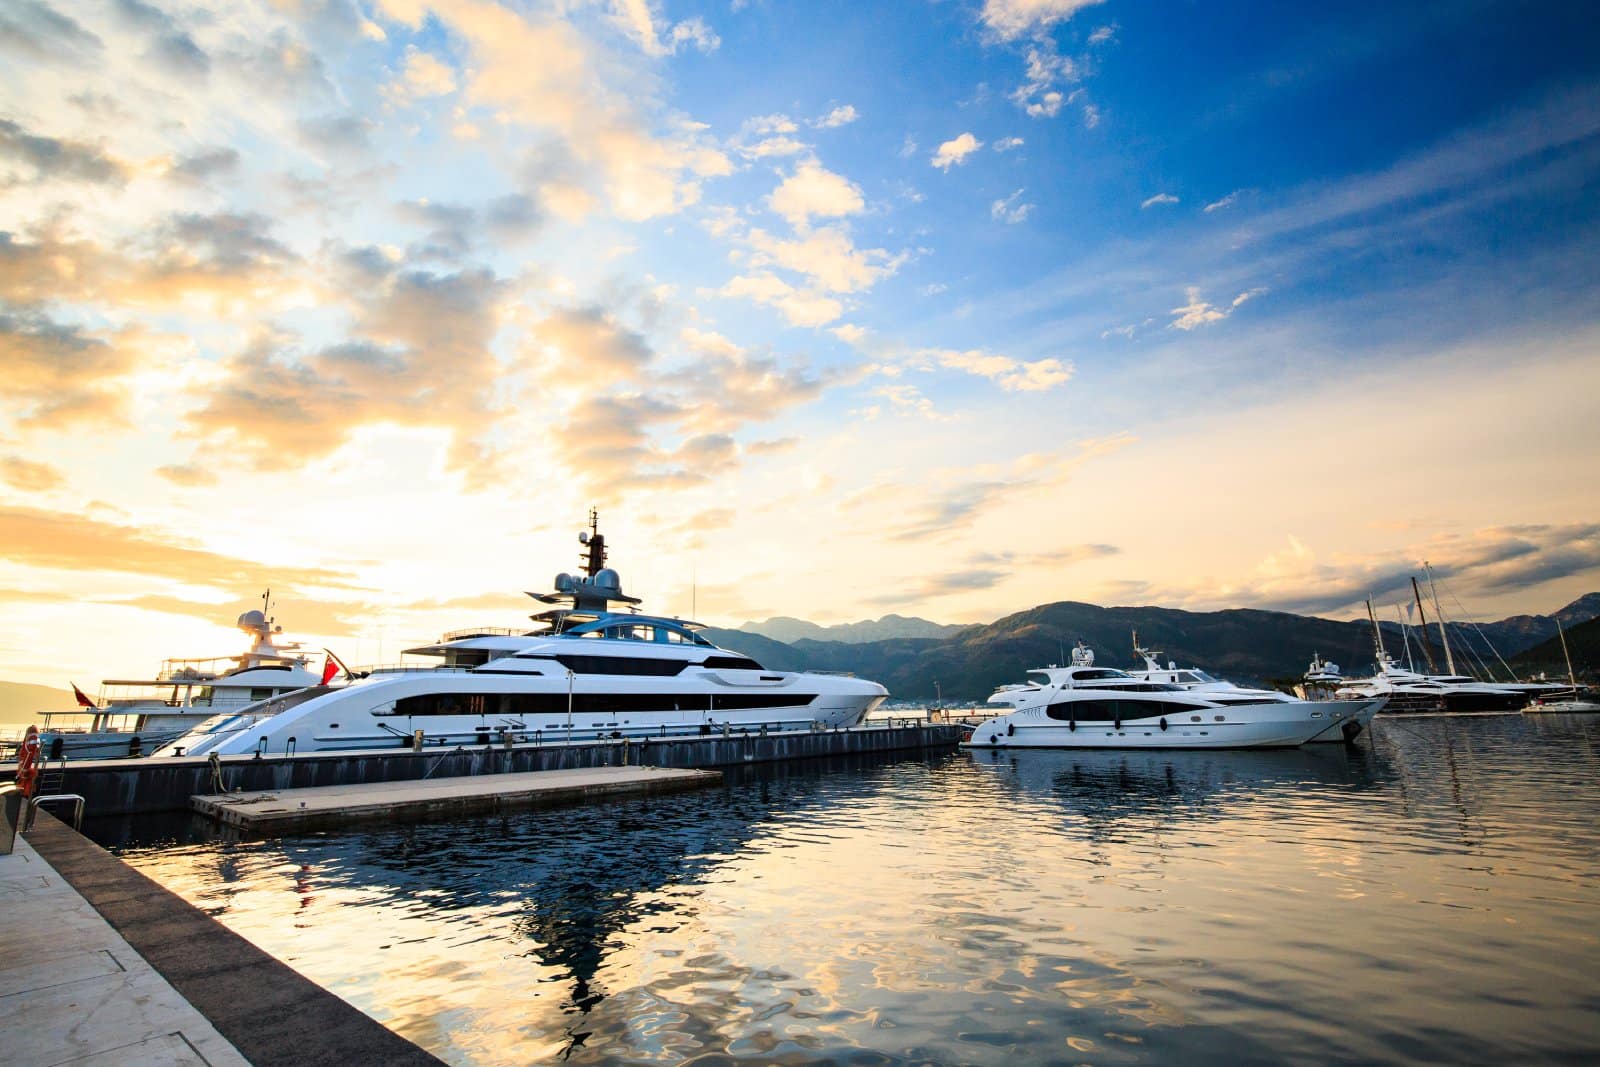 <p class="wp-caption-text">Image Credit: Shutterstock / Goncharovaia</p>  <p><span>Its harbor, lined with super-yachts and surrounded by high-end boutiques and restaurants, highlights the luxurious lifestyle that the area embodies. The region’s natural beauty, rich cultural heritage, and gastronomic excellence make it a fitting terminus for the Venice Simplon-Orient-Express’s new route.</span></p>